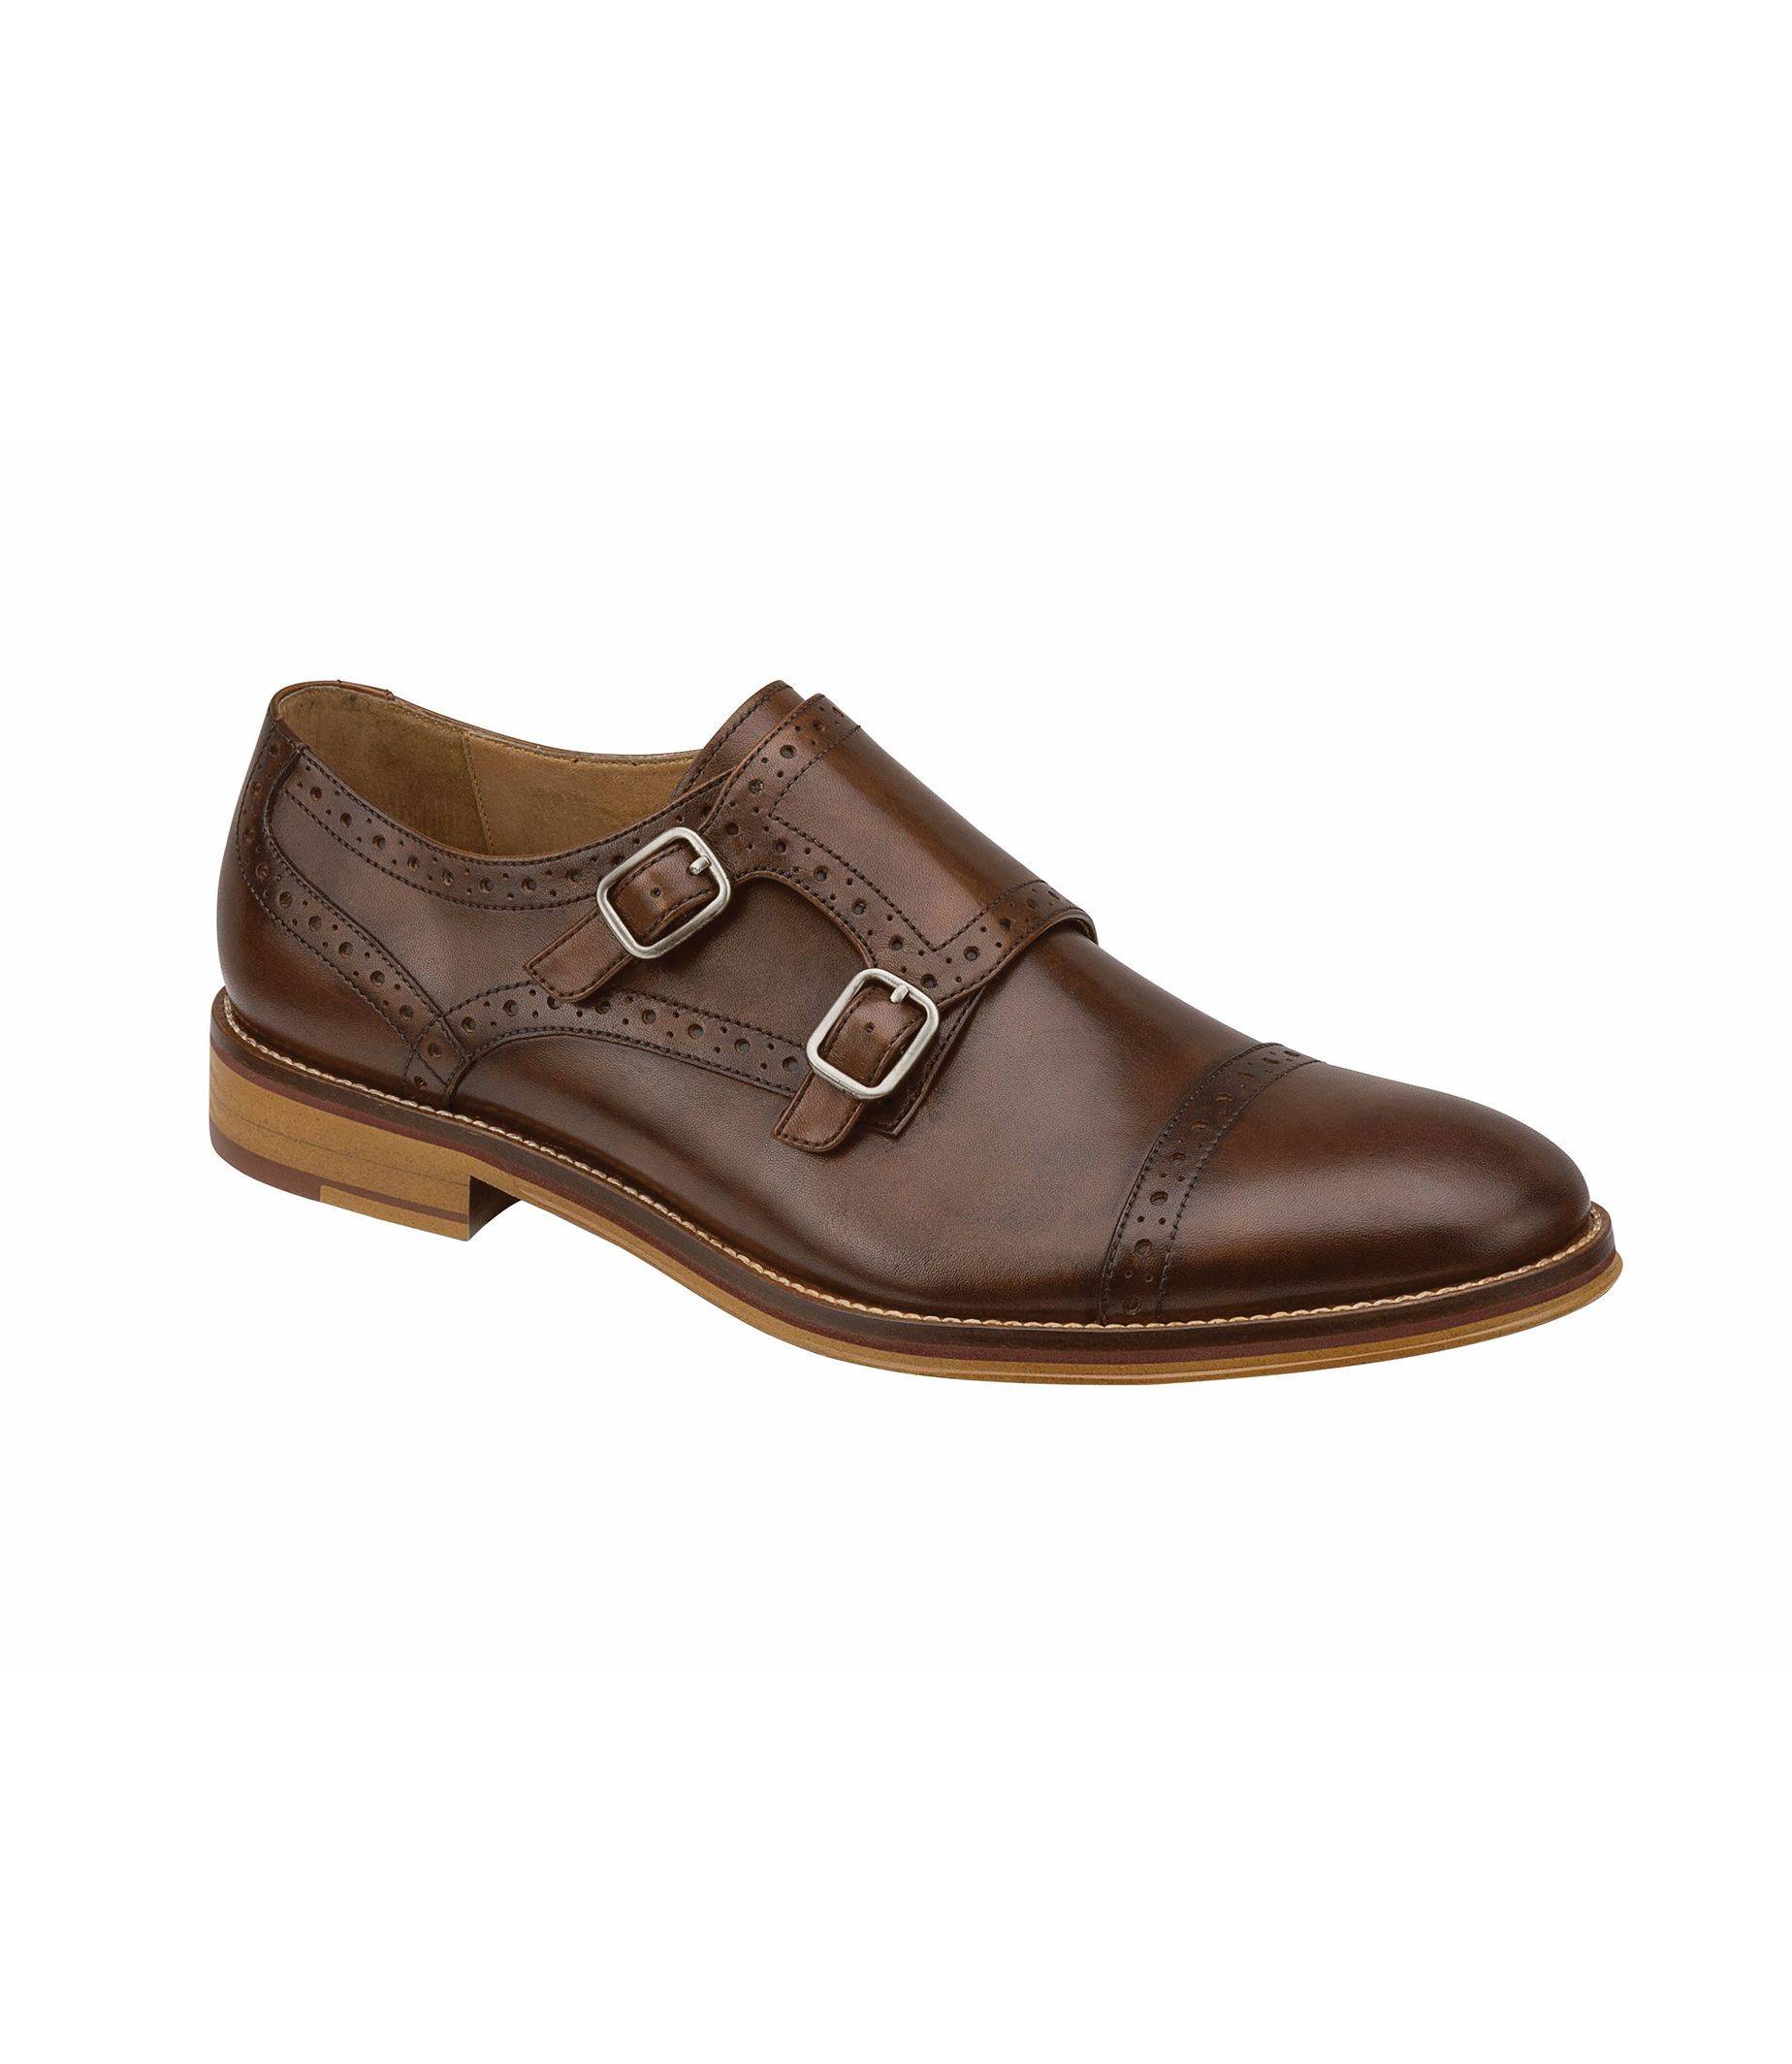 Conrad Double Monk Strap Shoe by Johnston and Murphy